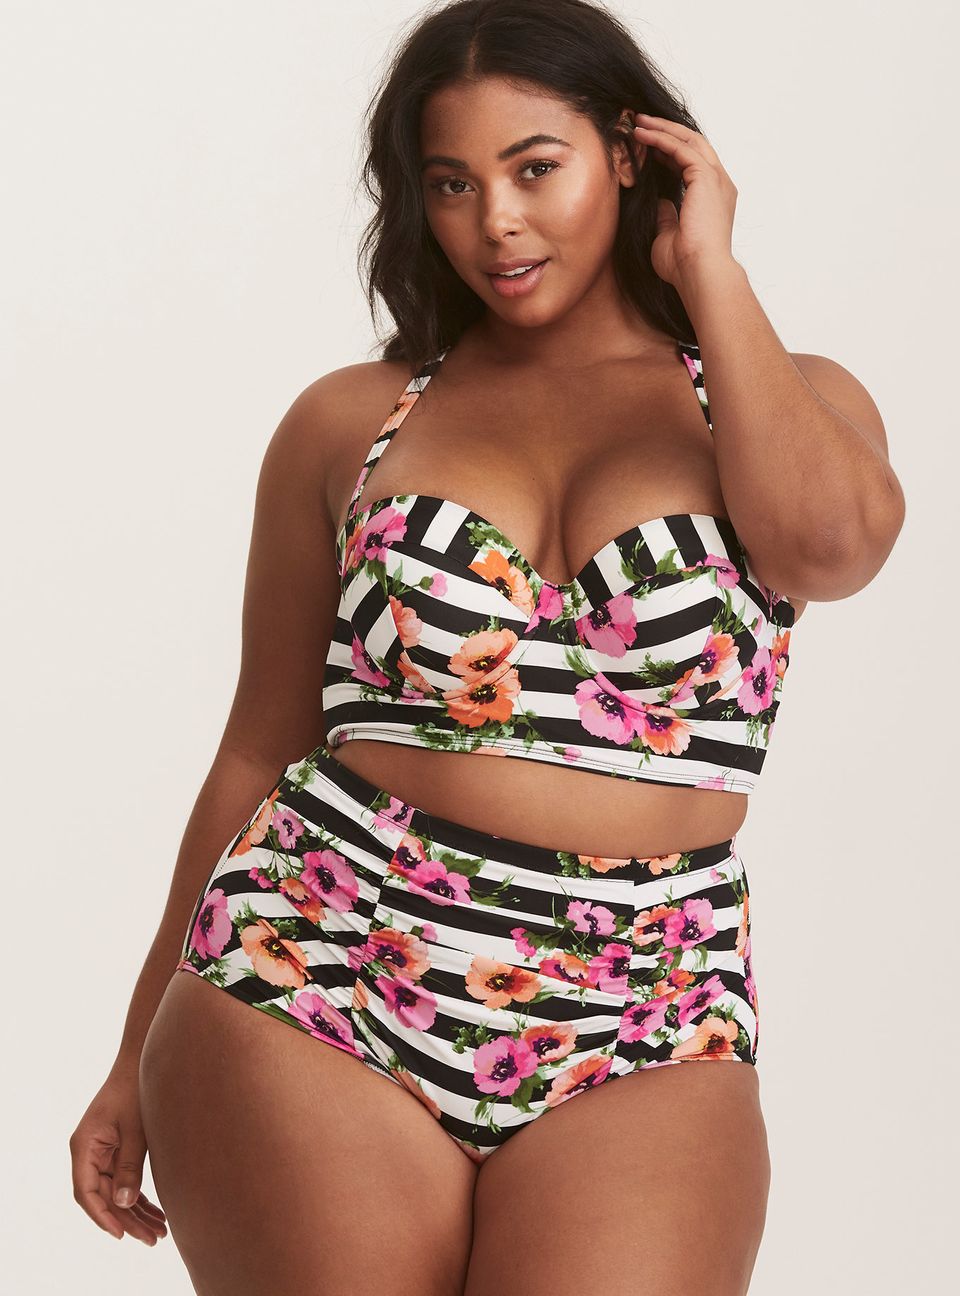 These Stunning Plus-Size Swimsuits With Underwire Are Here To Lift